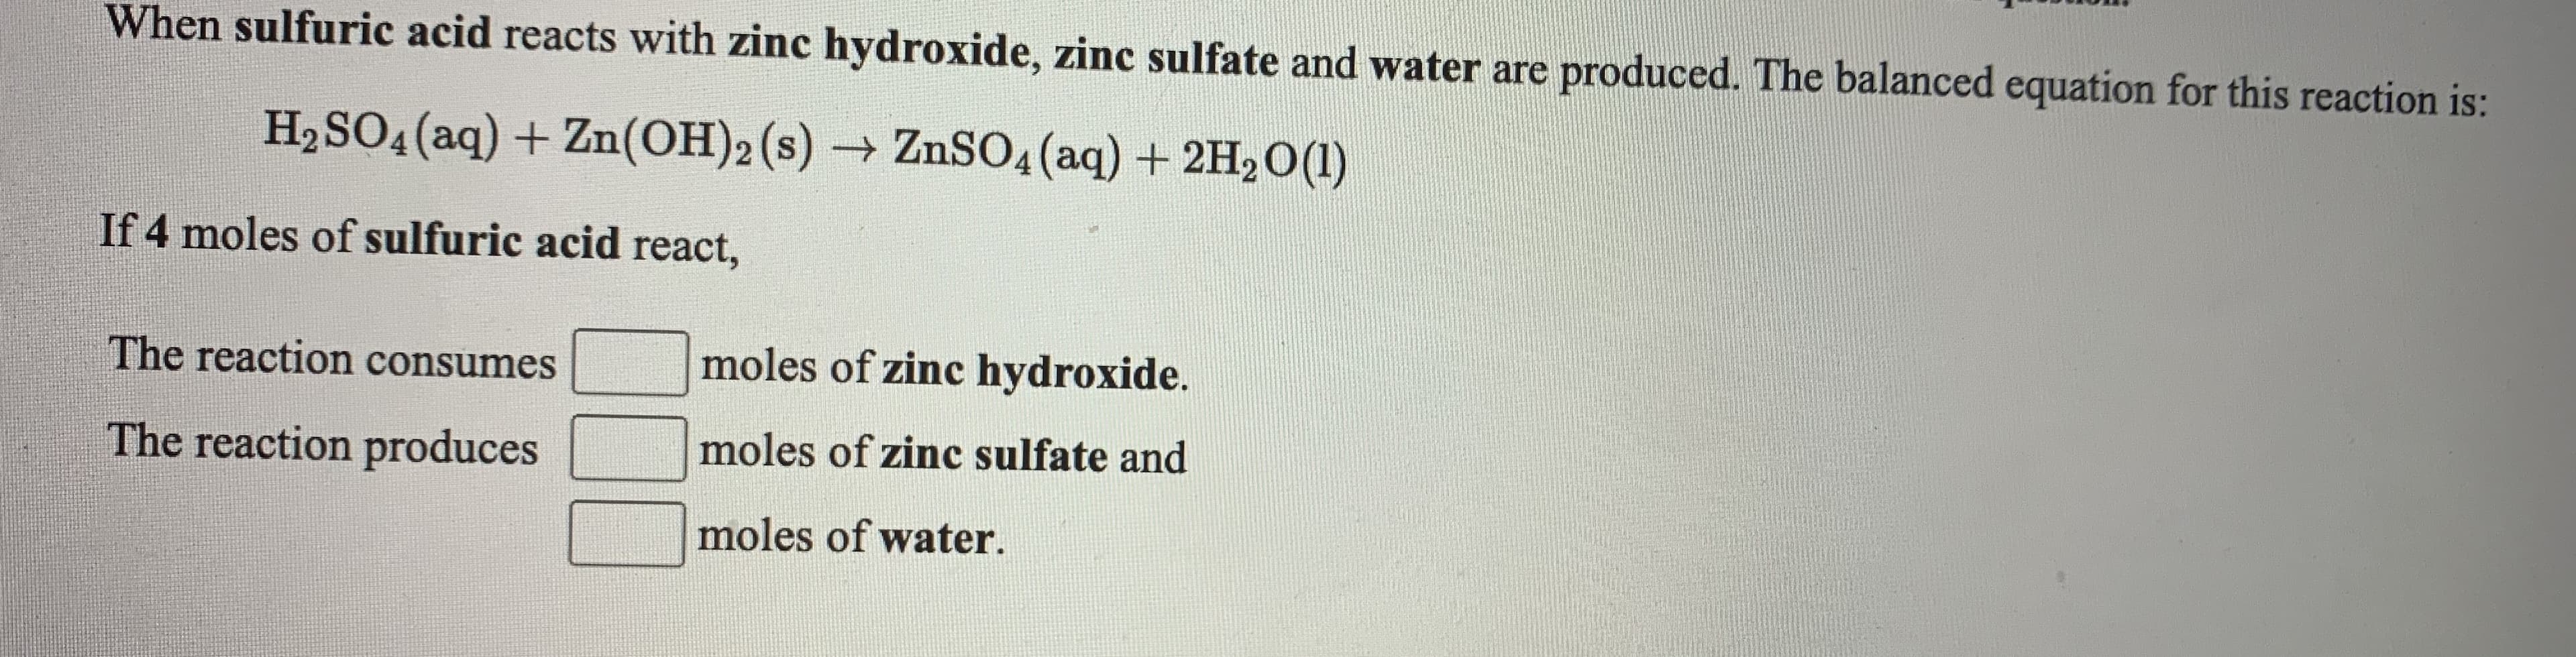 When sulfuric acid reacts with zinc hydroxide, zinc sulfate and water are produced. The balanced equation for this reaction is:
H2SO4(aq) + Zn(OH)2(s) → ZnSO4 (aq) + 2H2O(1)
->
If 4 moles of sulfuric acid react,
